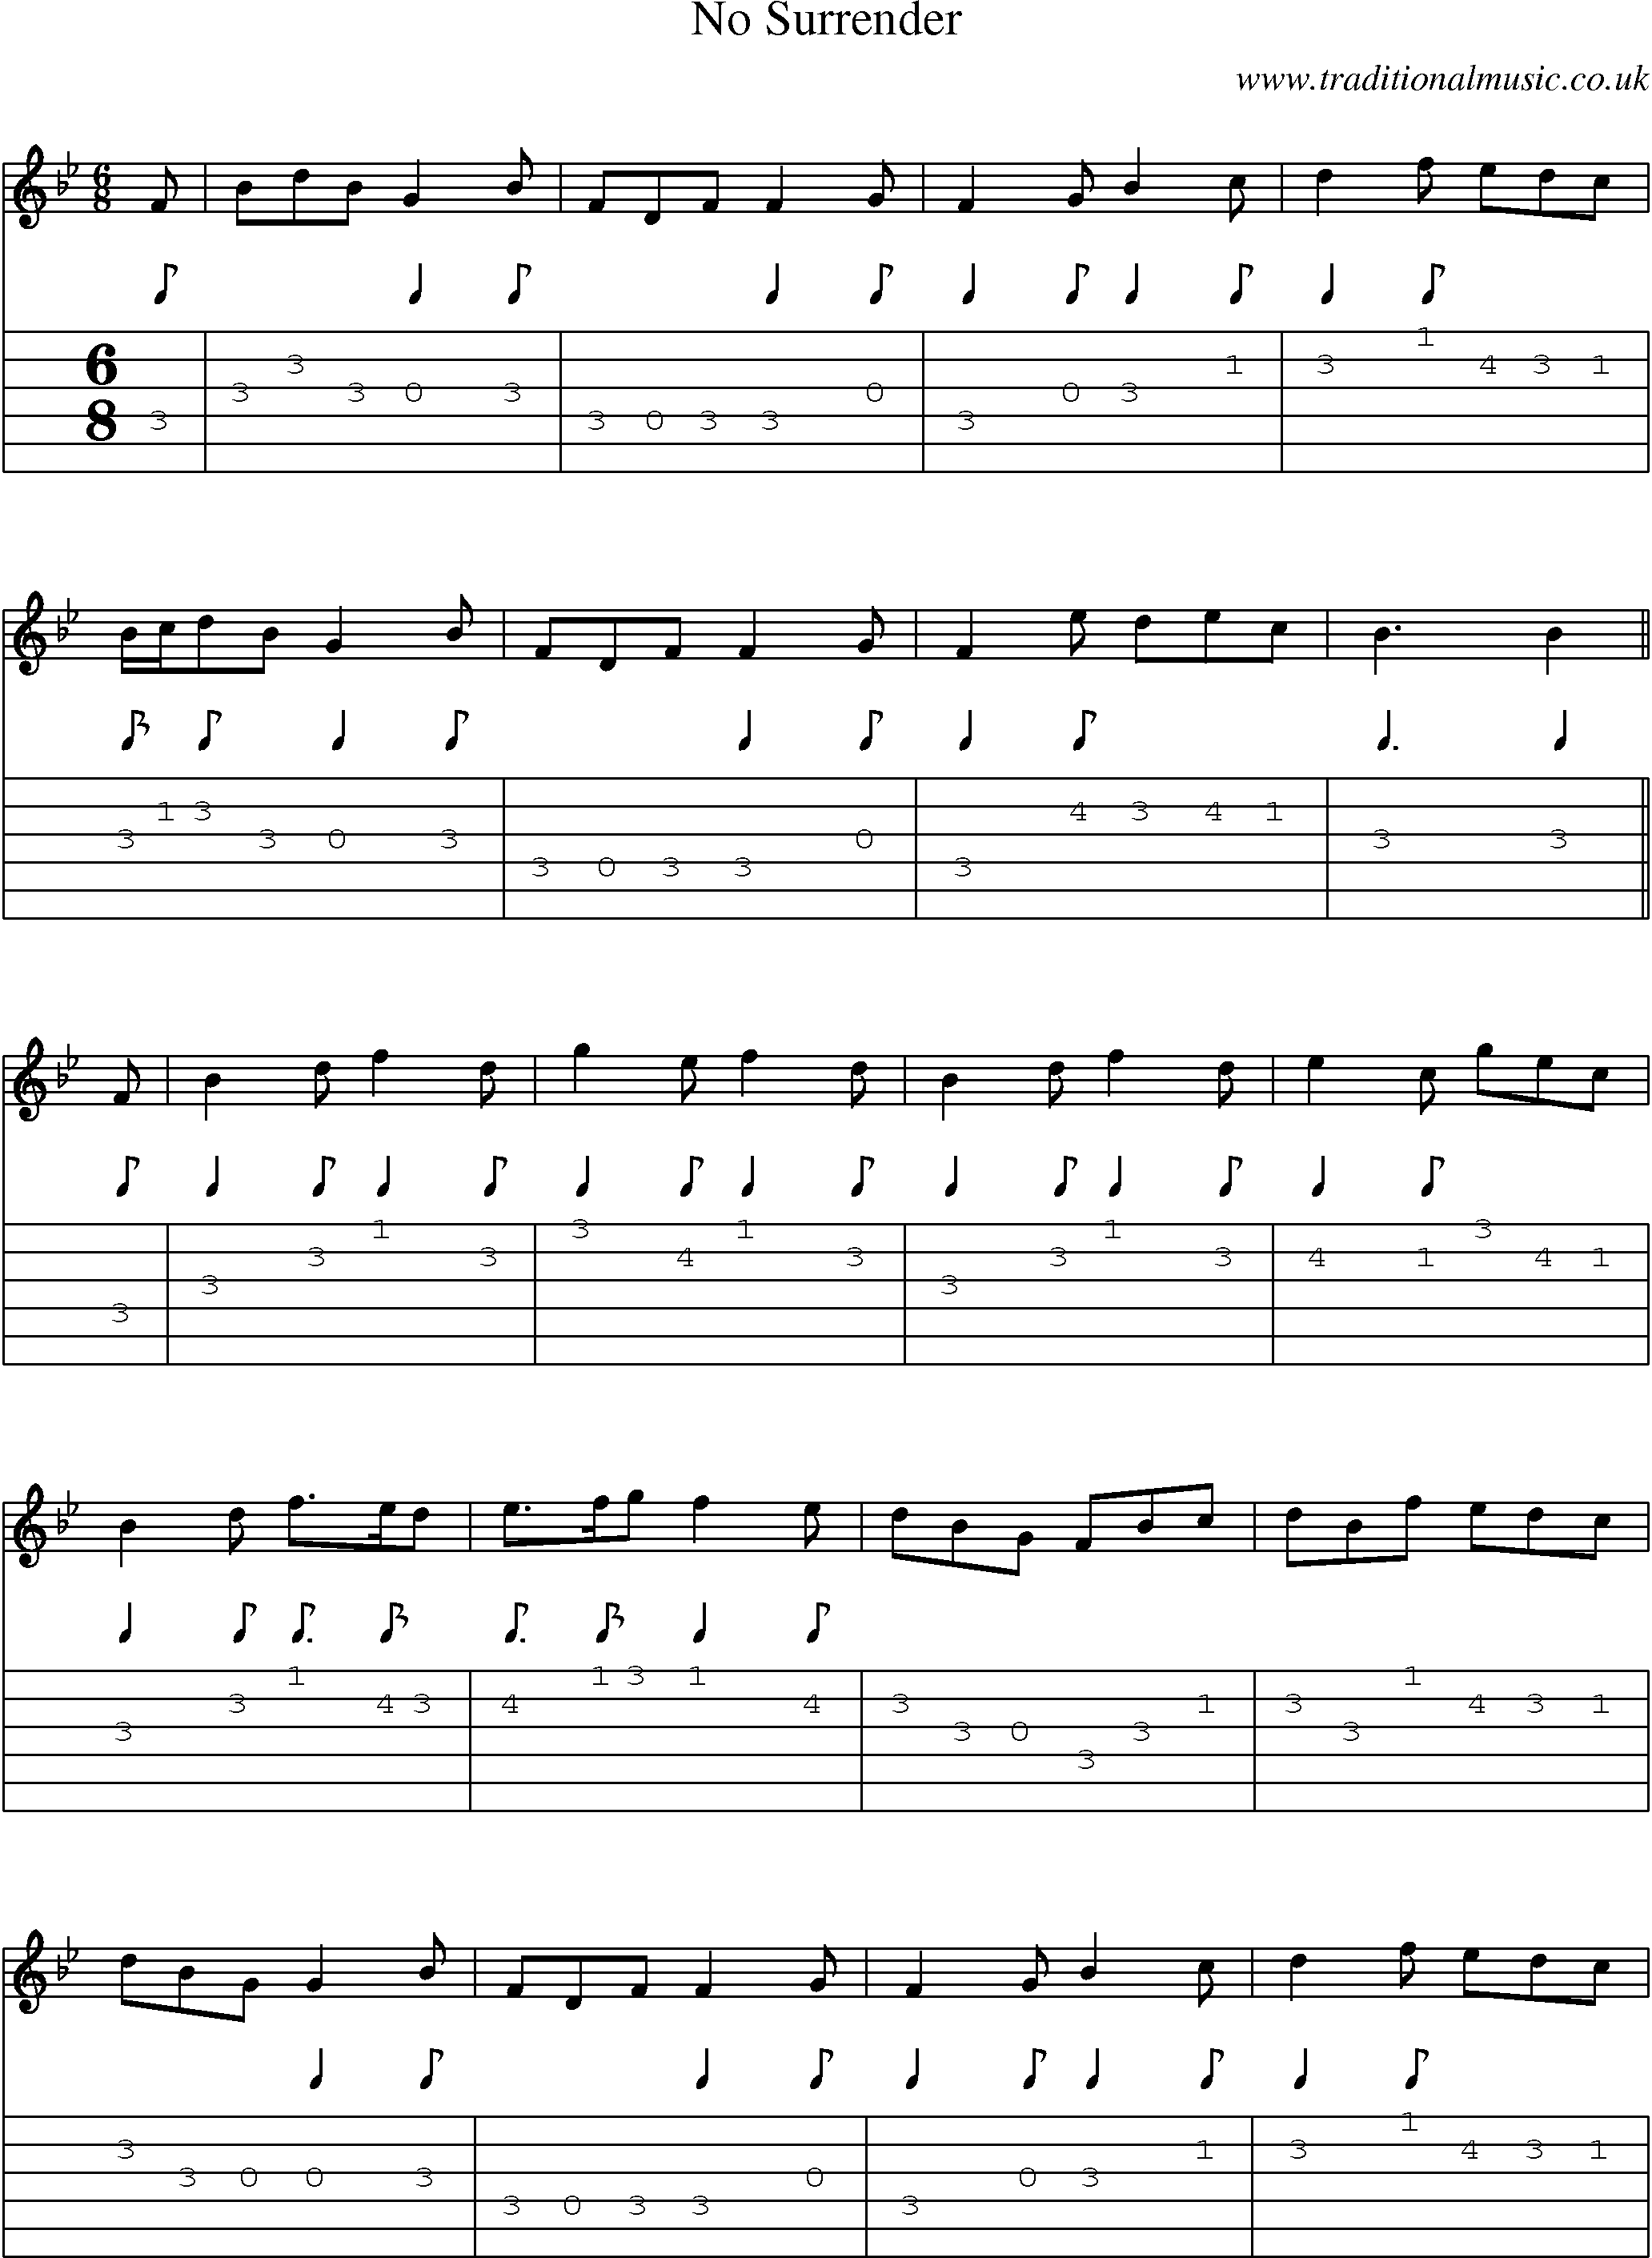 Music Score and Guitar Tabs for No Surrender